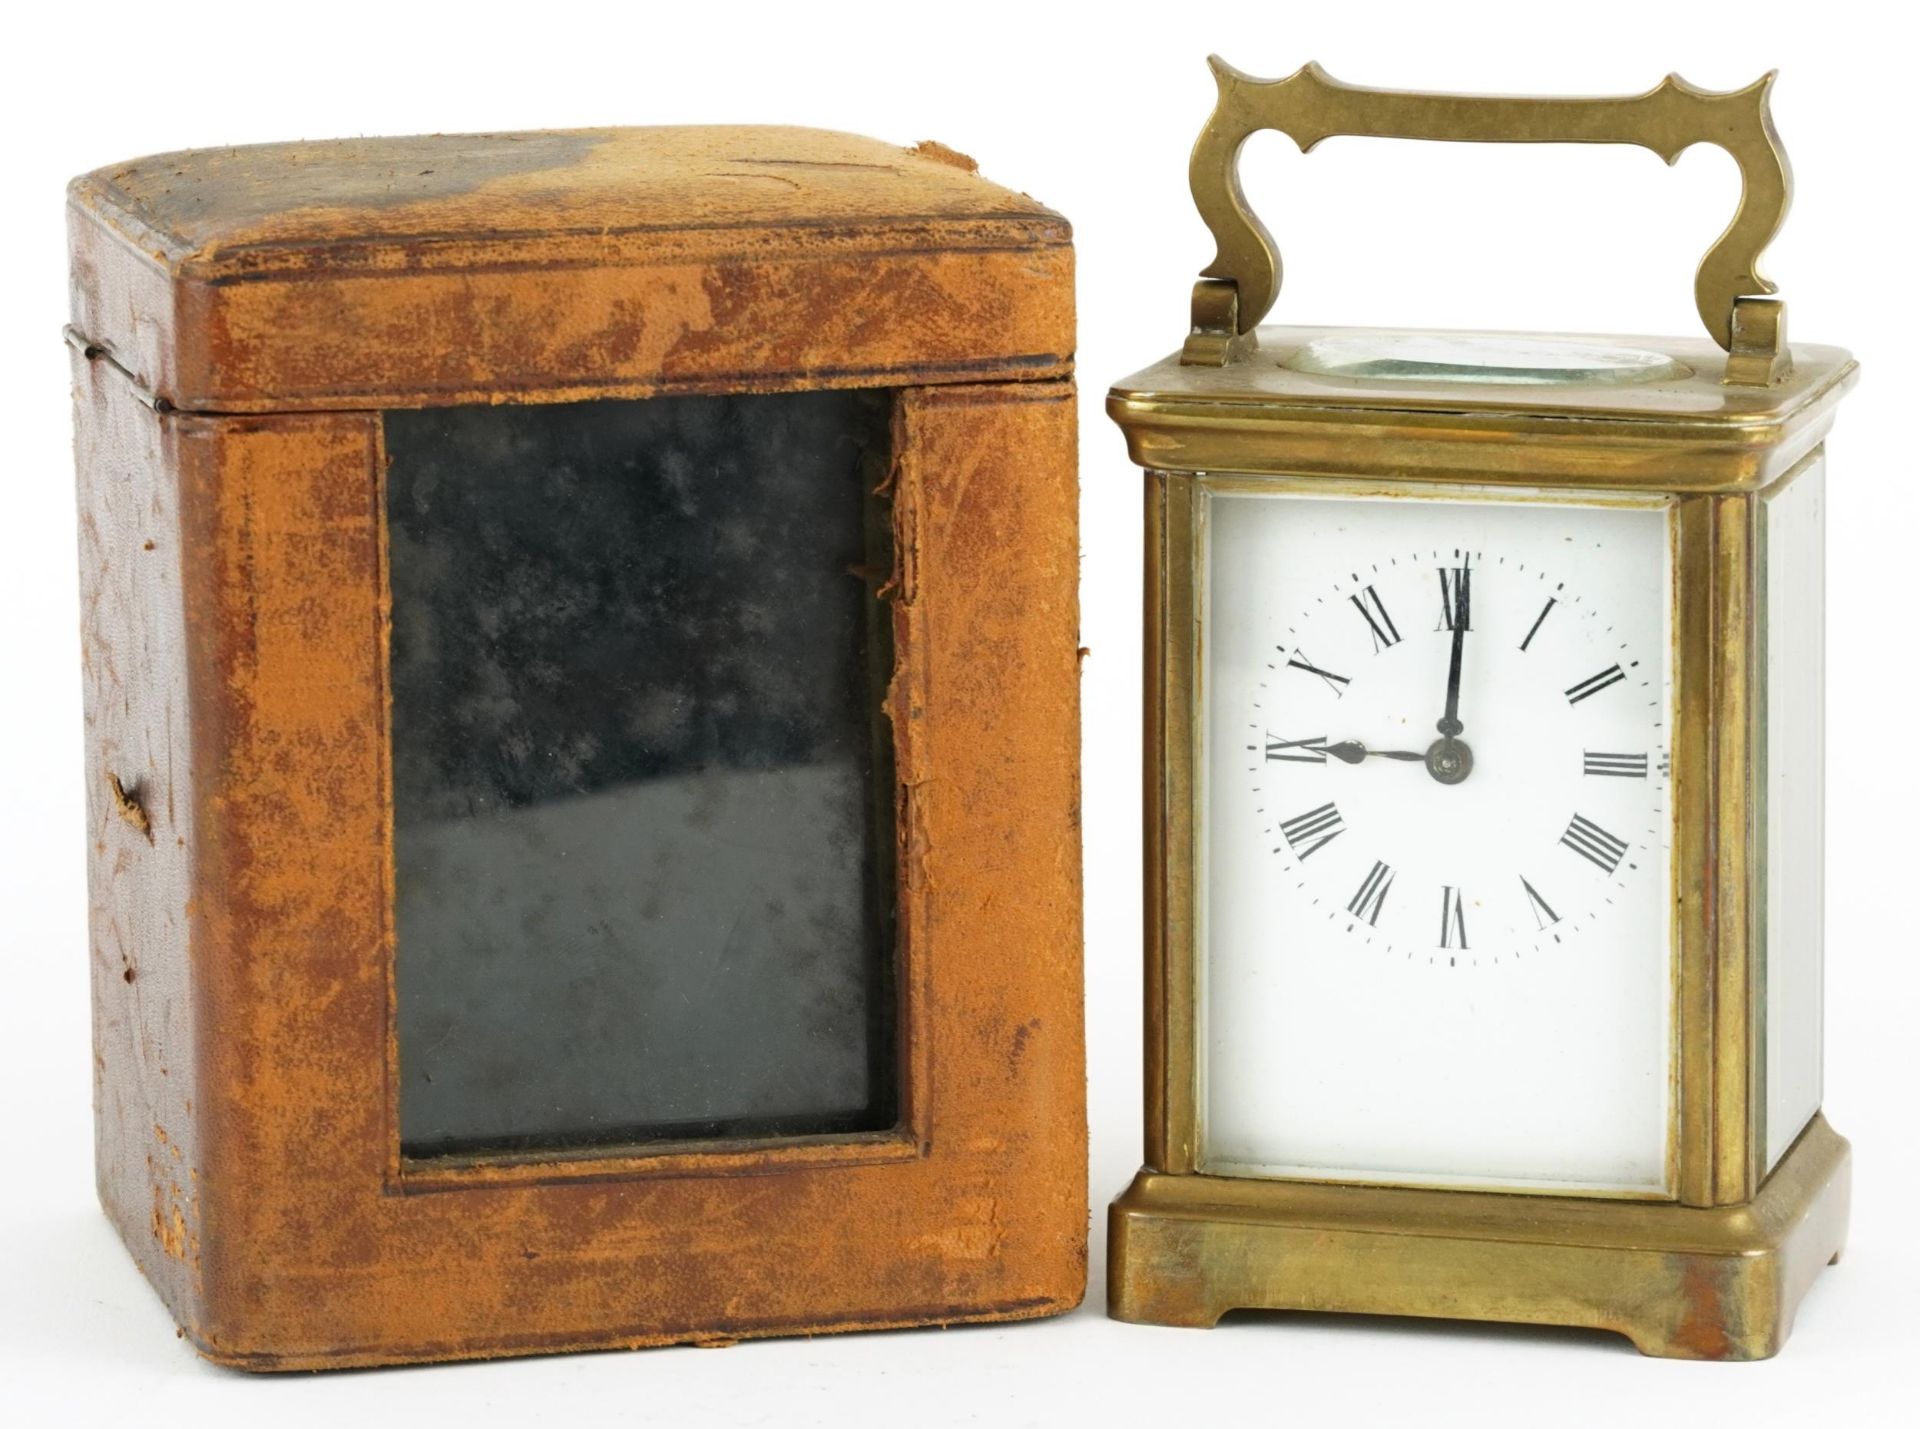 Richard & Co, 19th century French brass cased carriage clock with velvet lined leather travel case